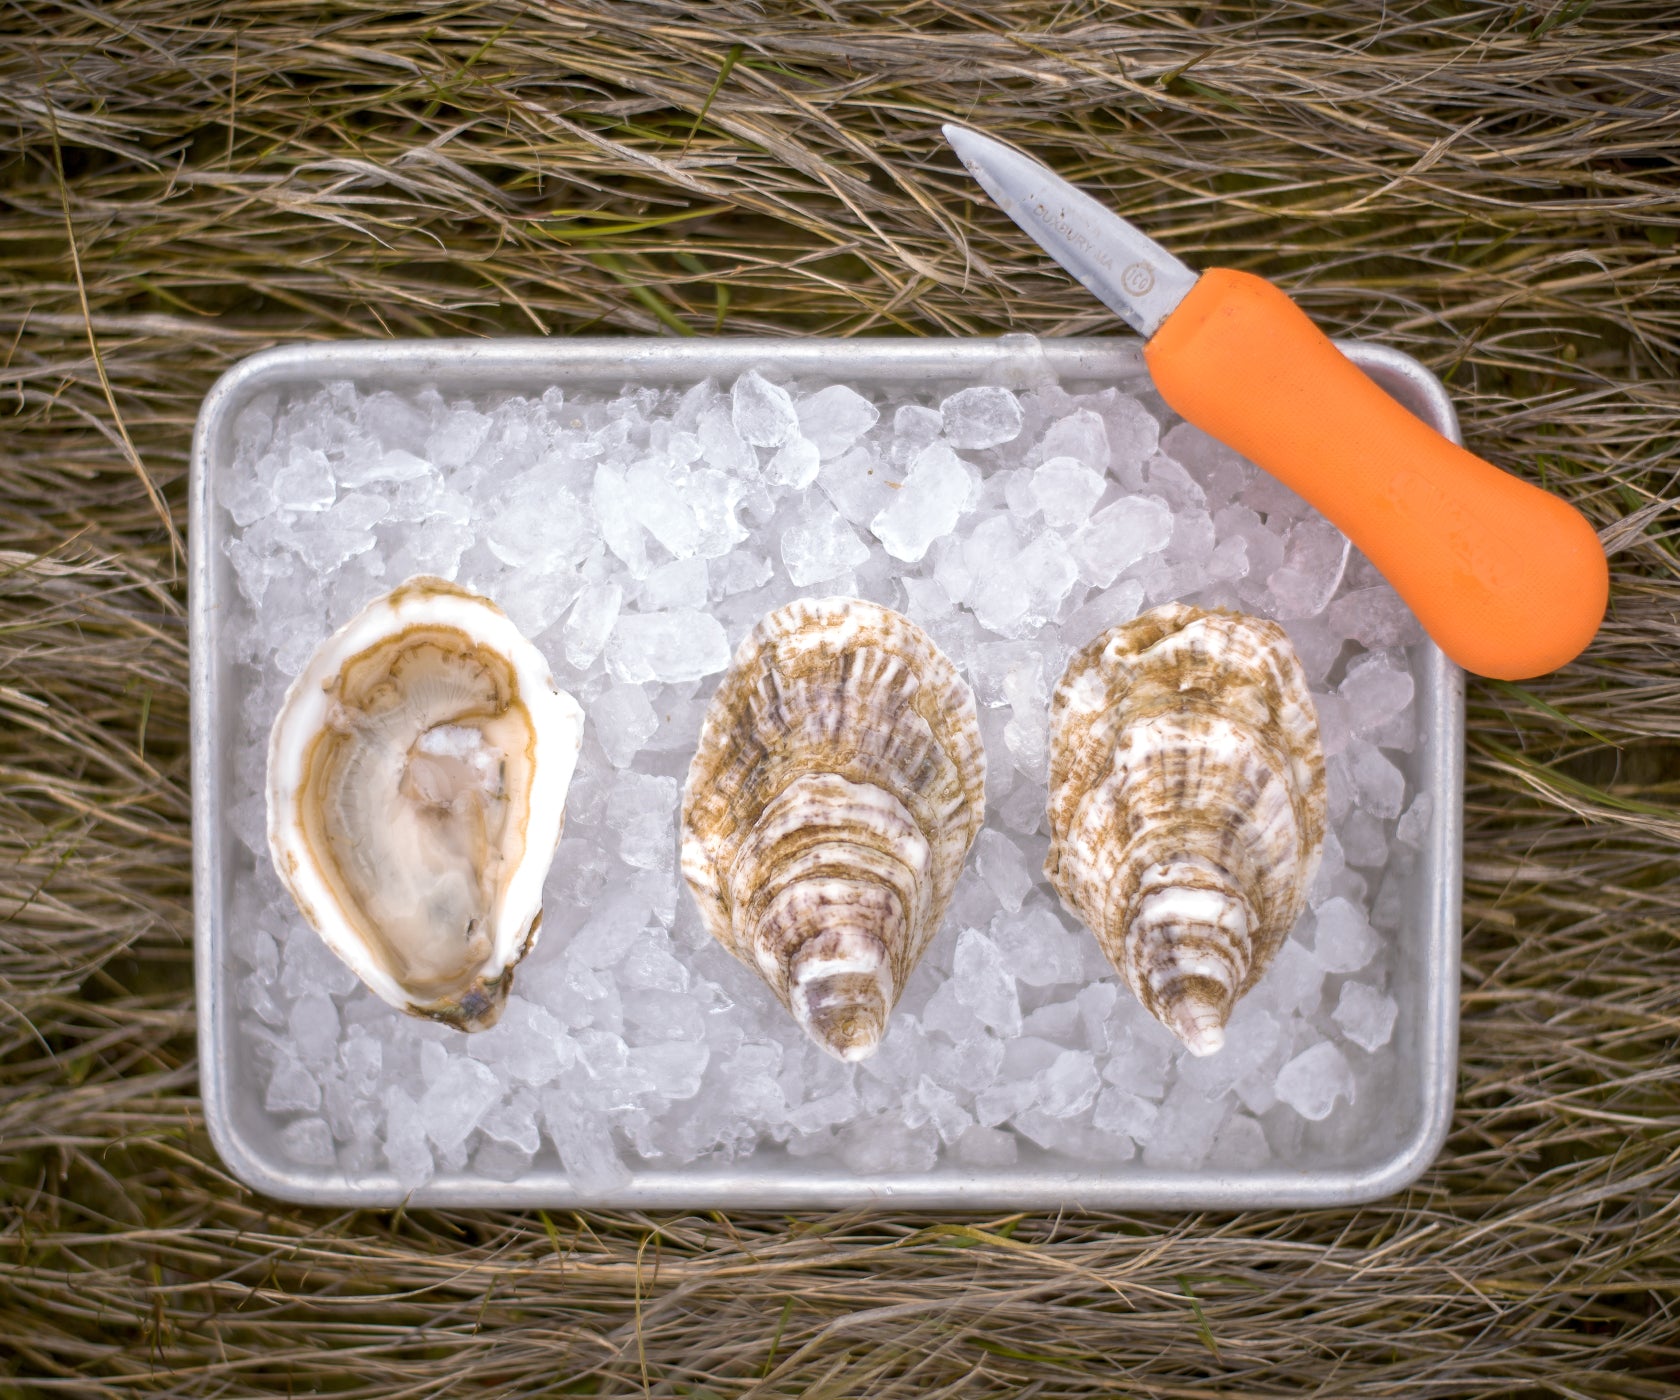 Bass Point Oysters from Nantucket, MA